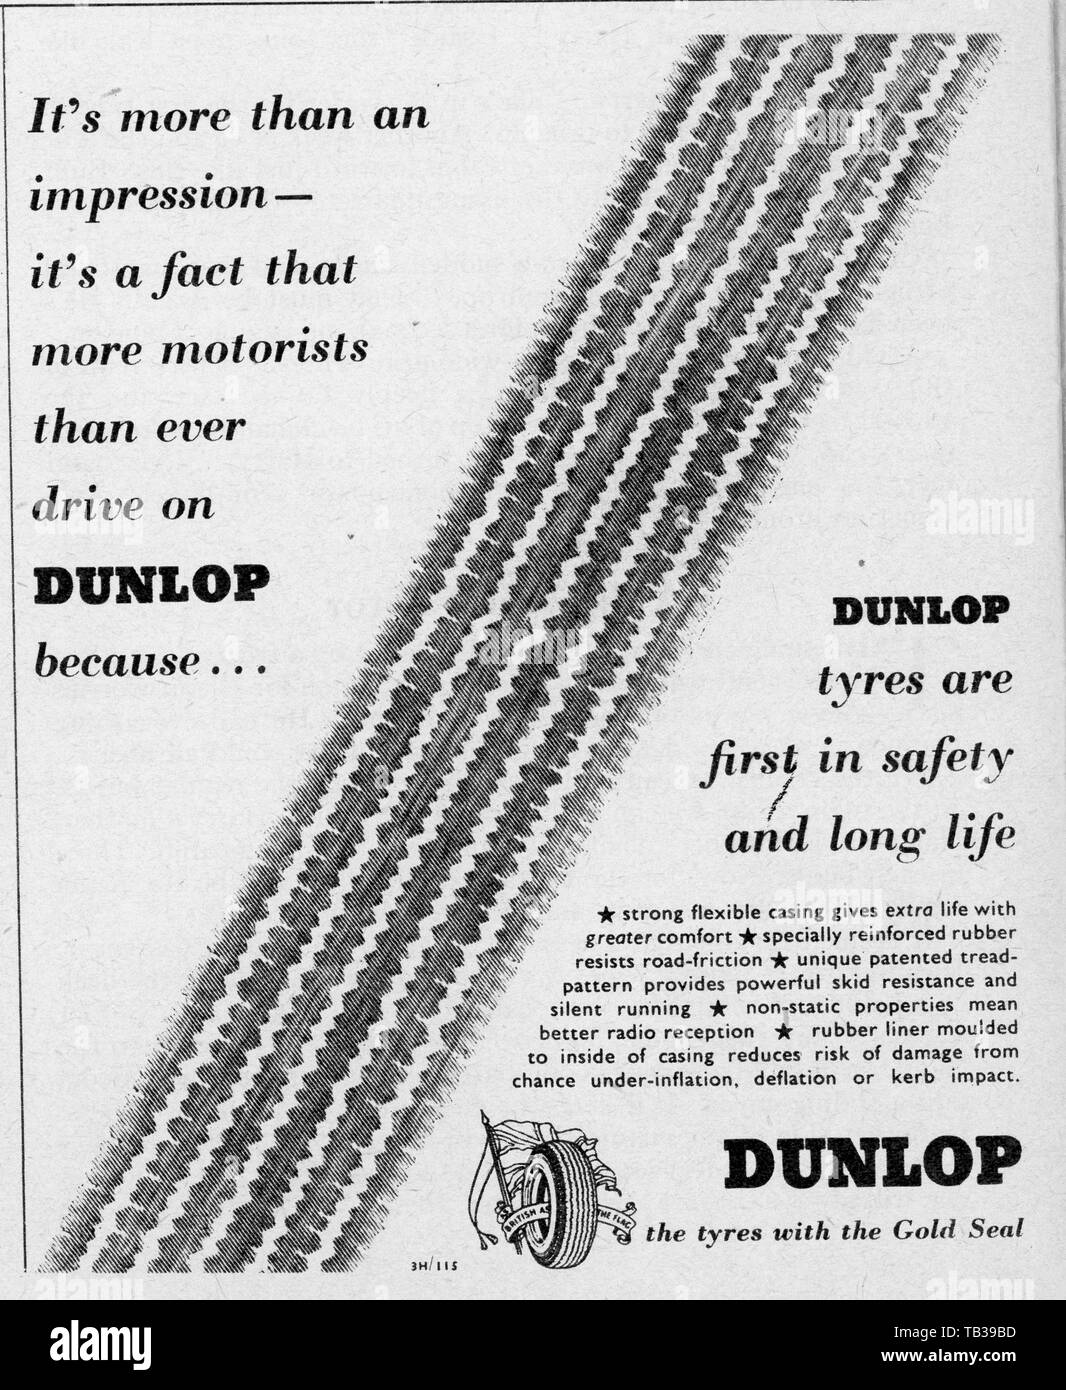 Dunlop Tyres Advert 4 April 1953  Photo by Tony Henshaw Stock Photo